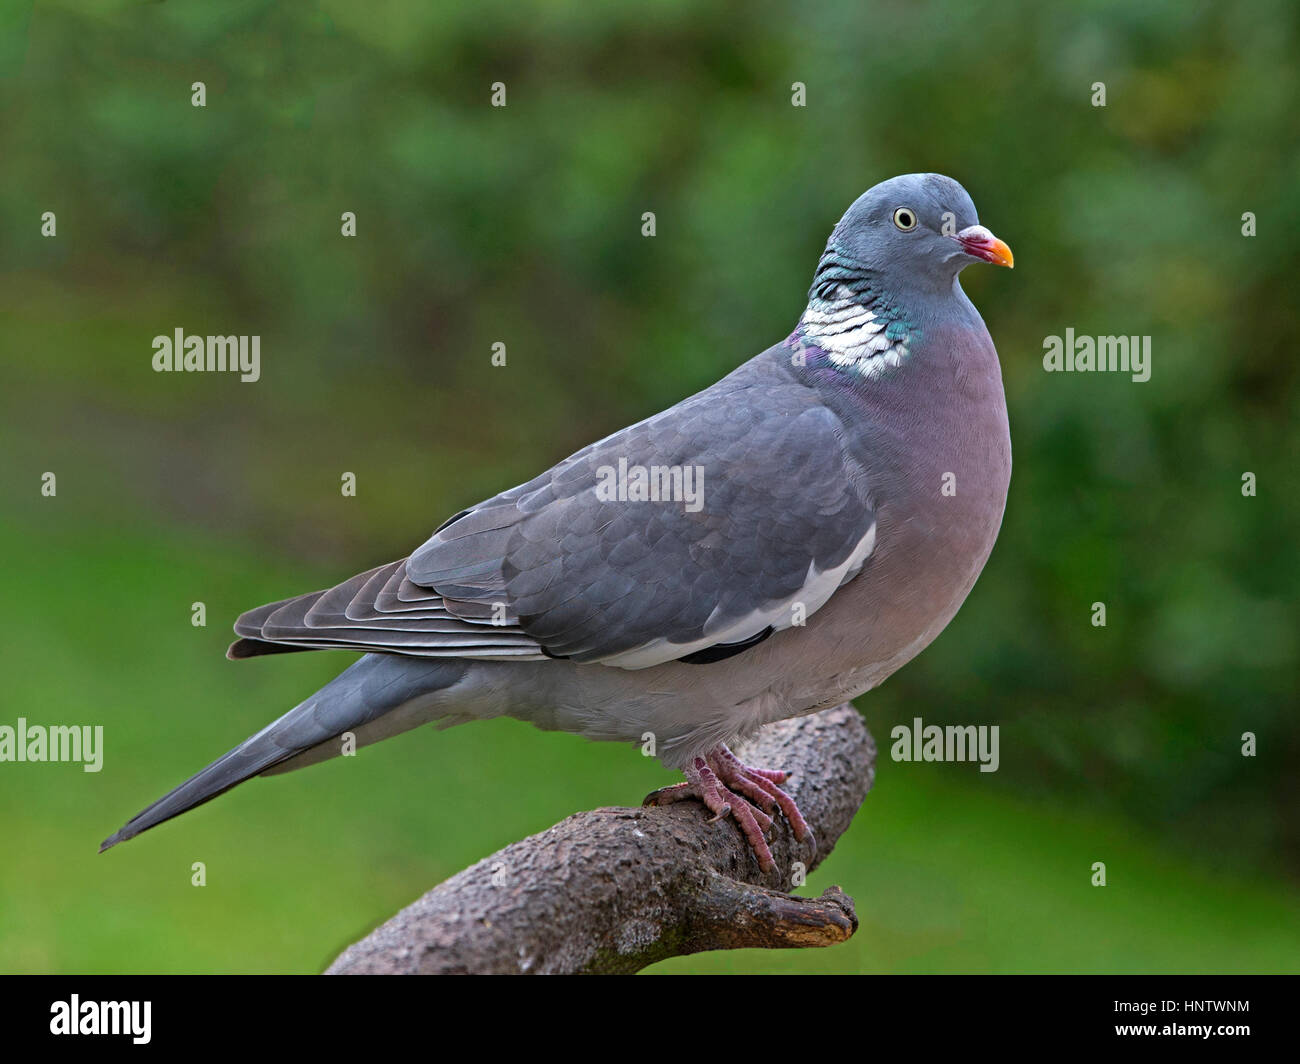 Common woodpigeon perched on branch Stock Photo